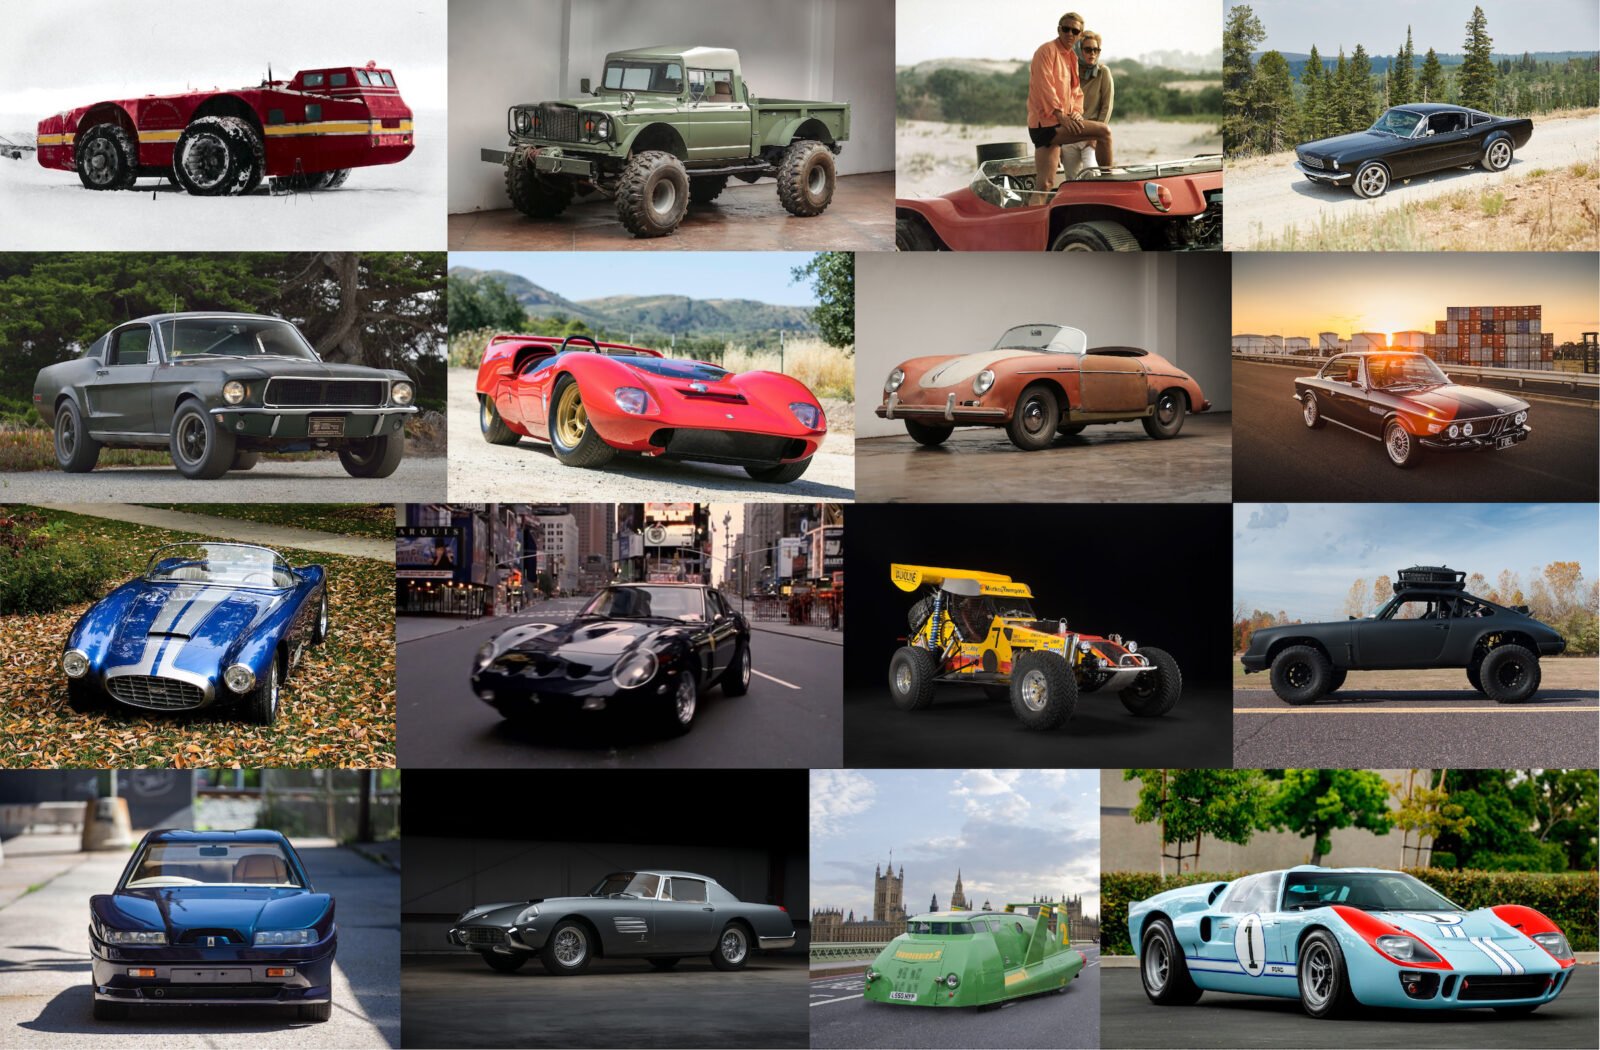 The Top 19 Cars Of 2019 On Silodrome